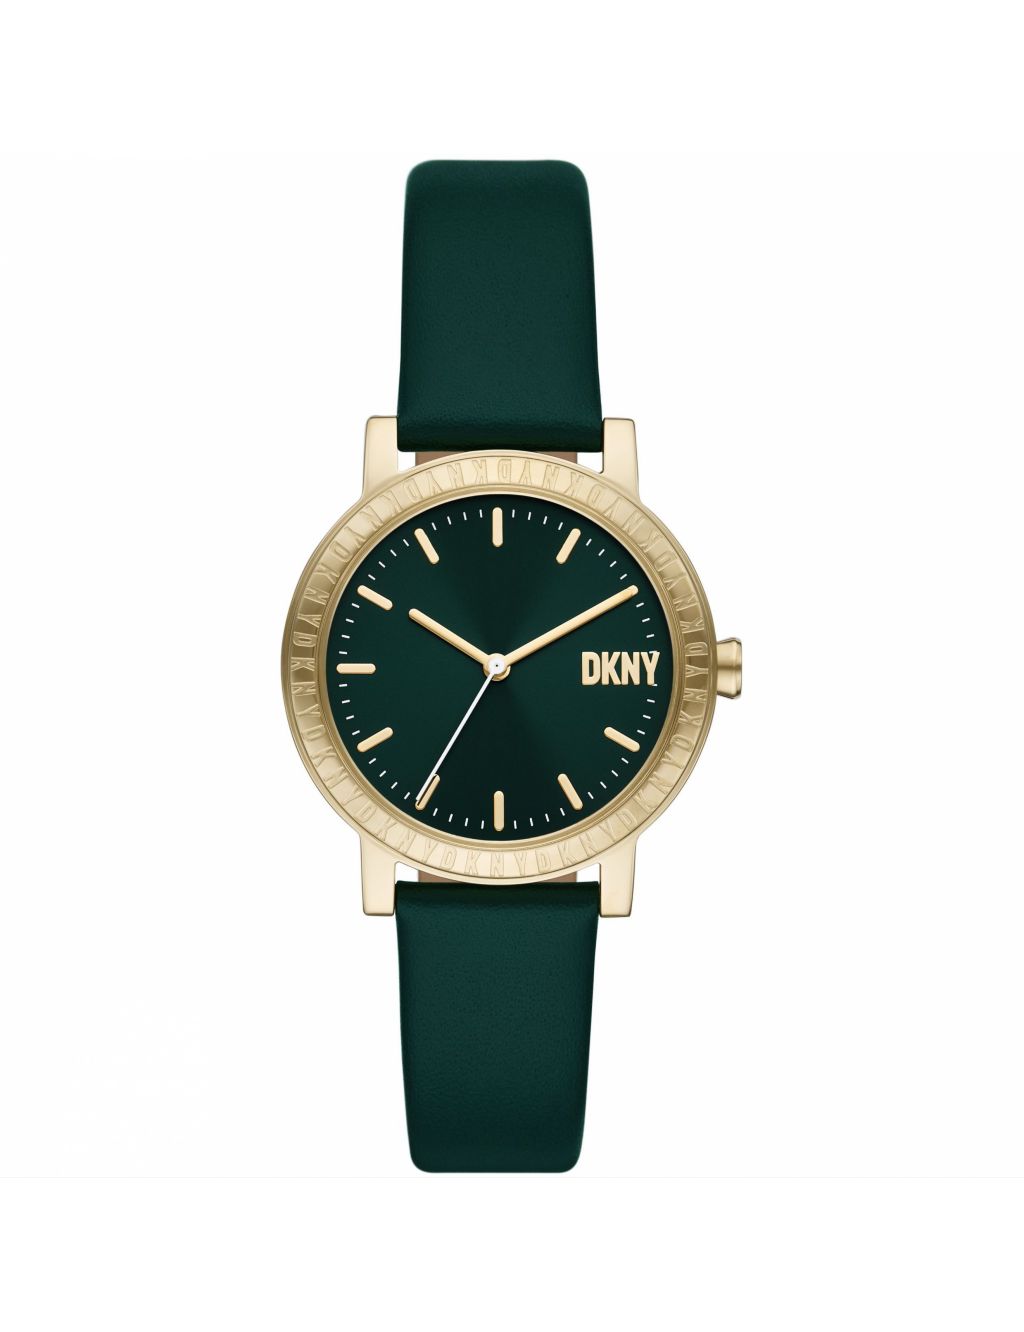 DKNY 7th Avenue Leather Watch image 1